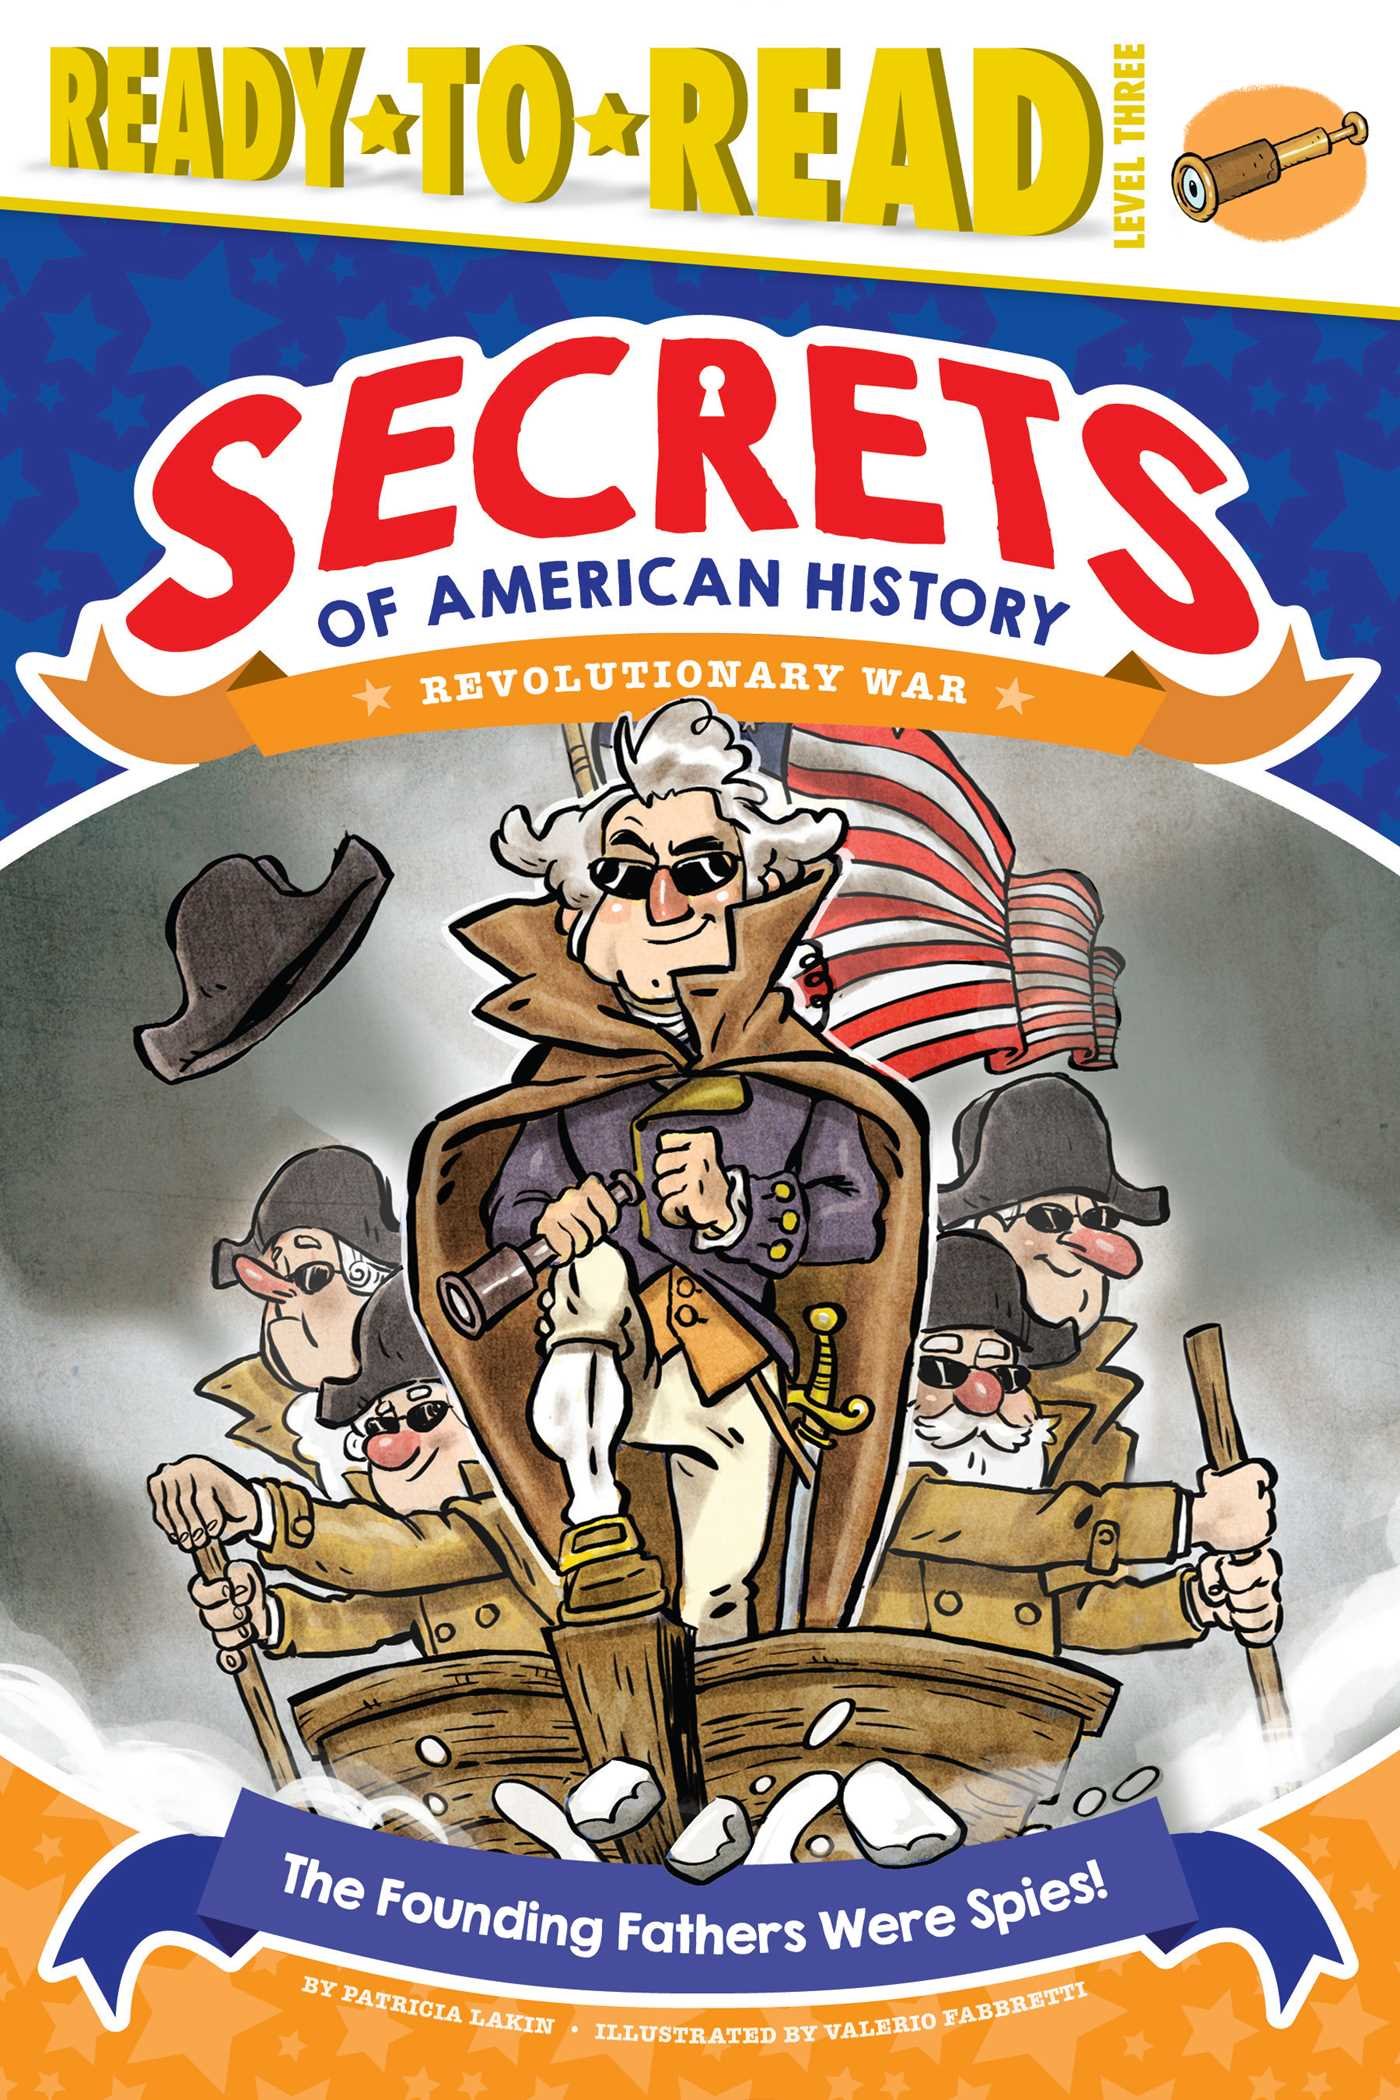 The Founding Fathers Were Spies! Revolutionary War